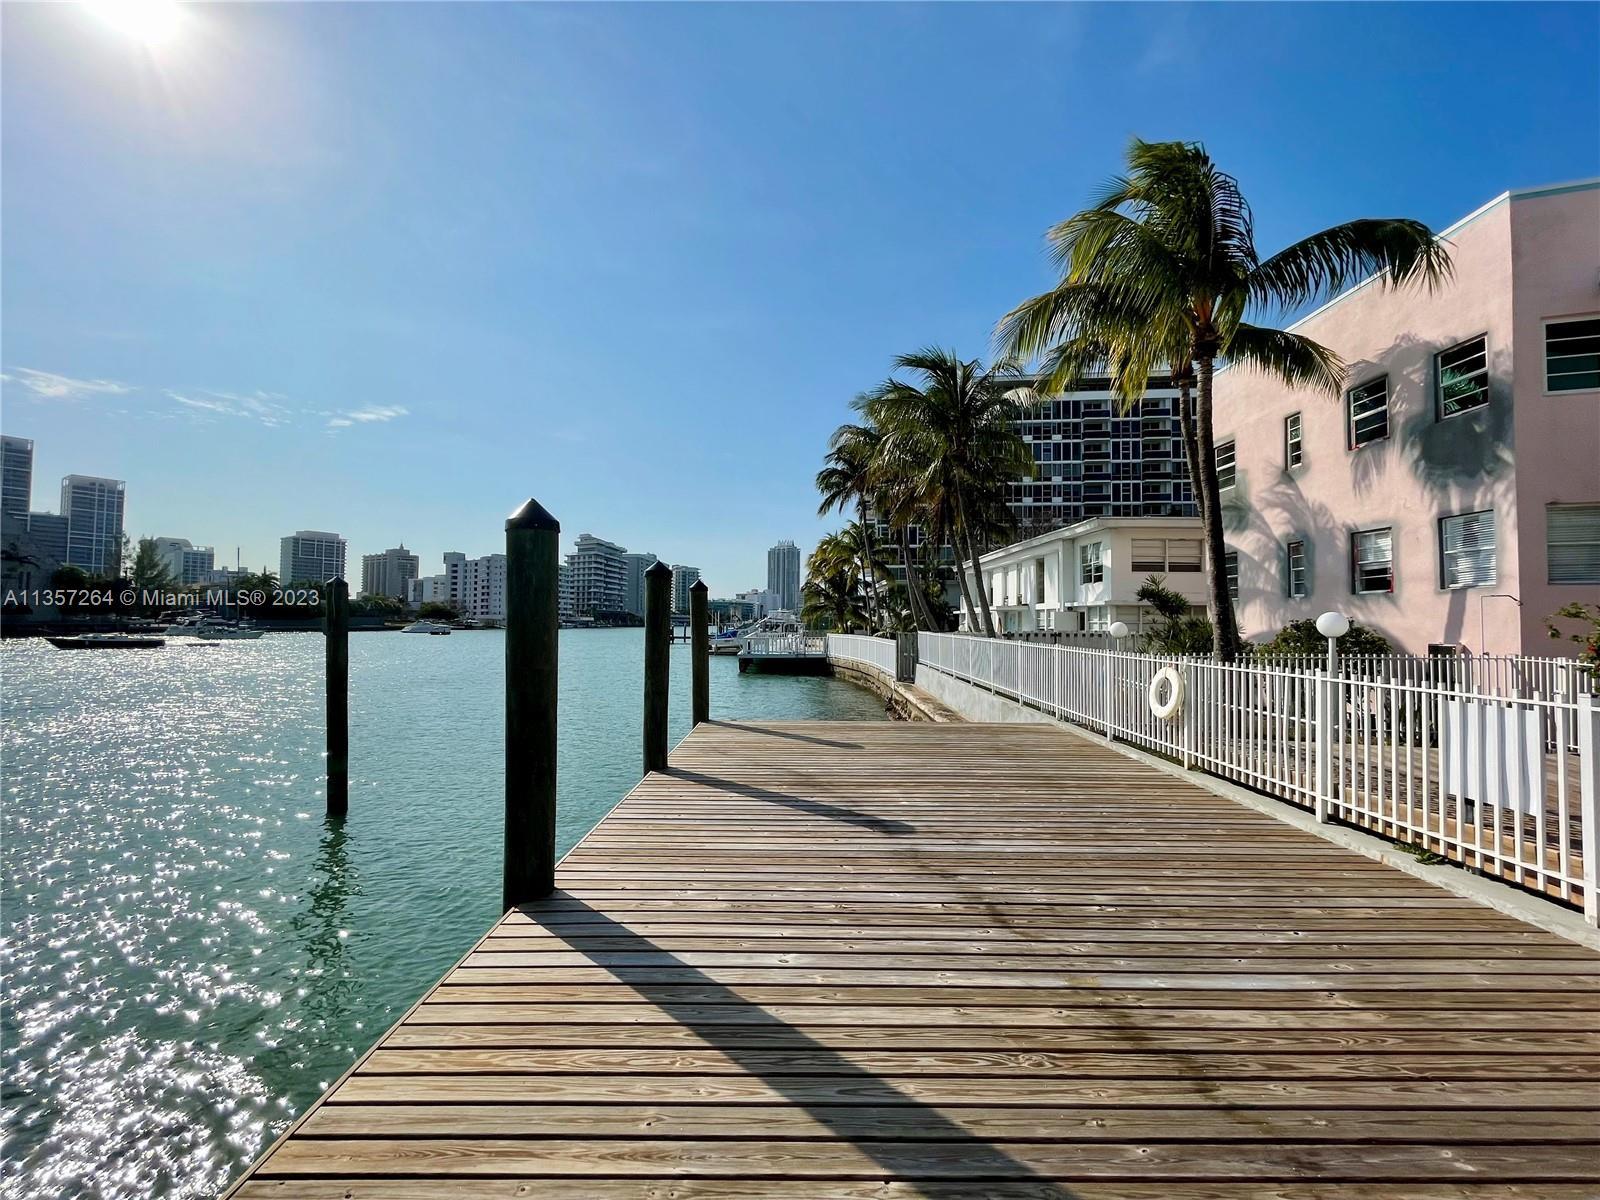 Dream 2/1 Condo in iconic Art-Deco Building with Boat Dock available for rent. Spacious Floor Plan, 